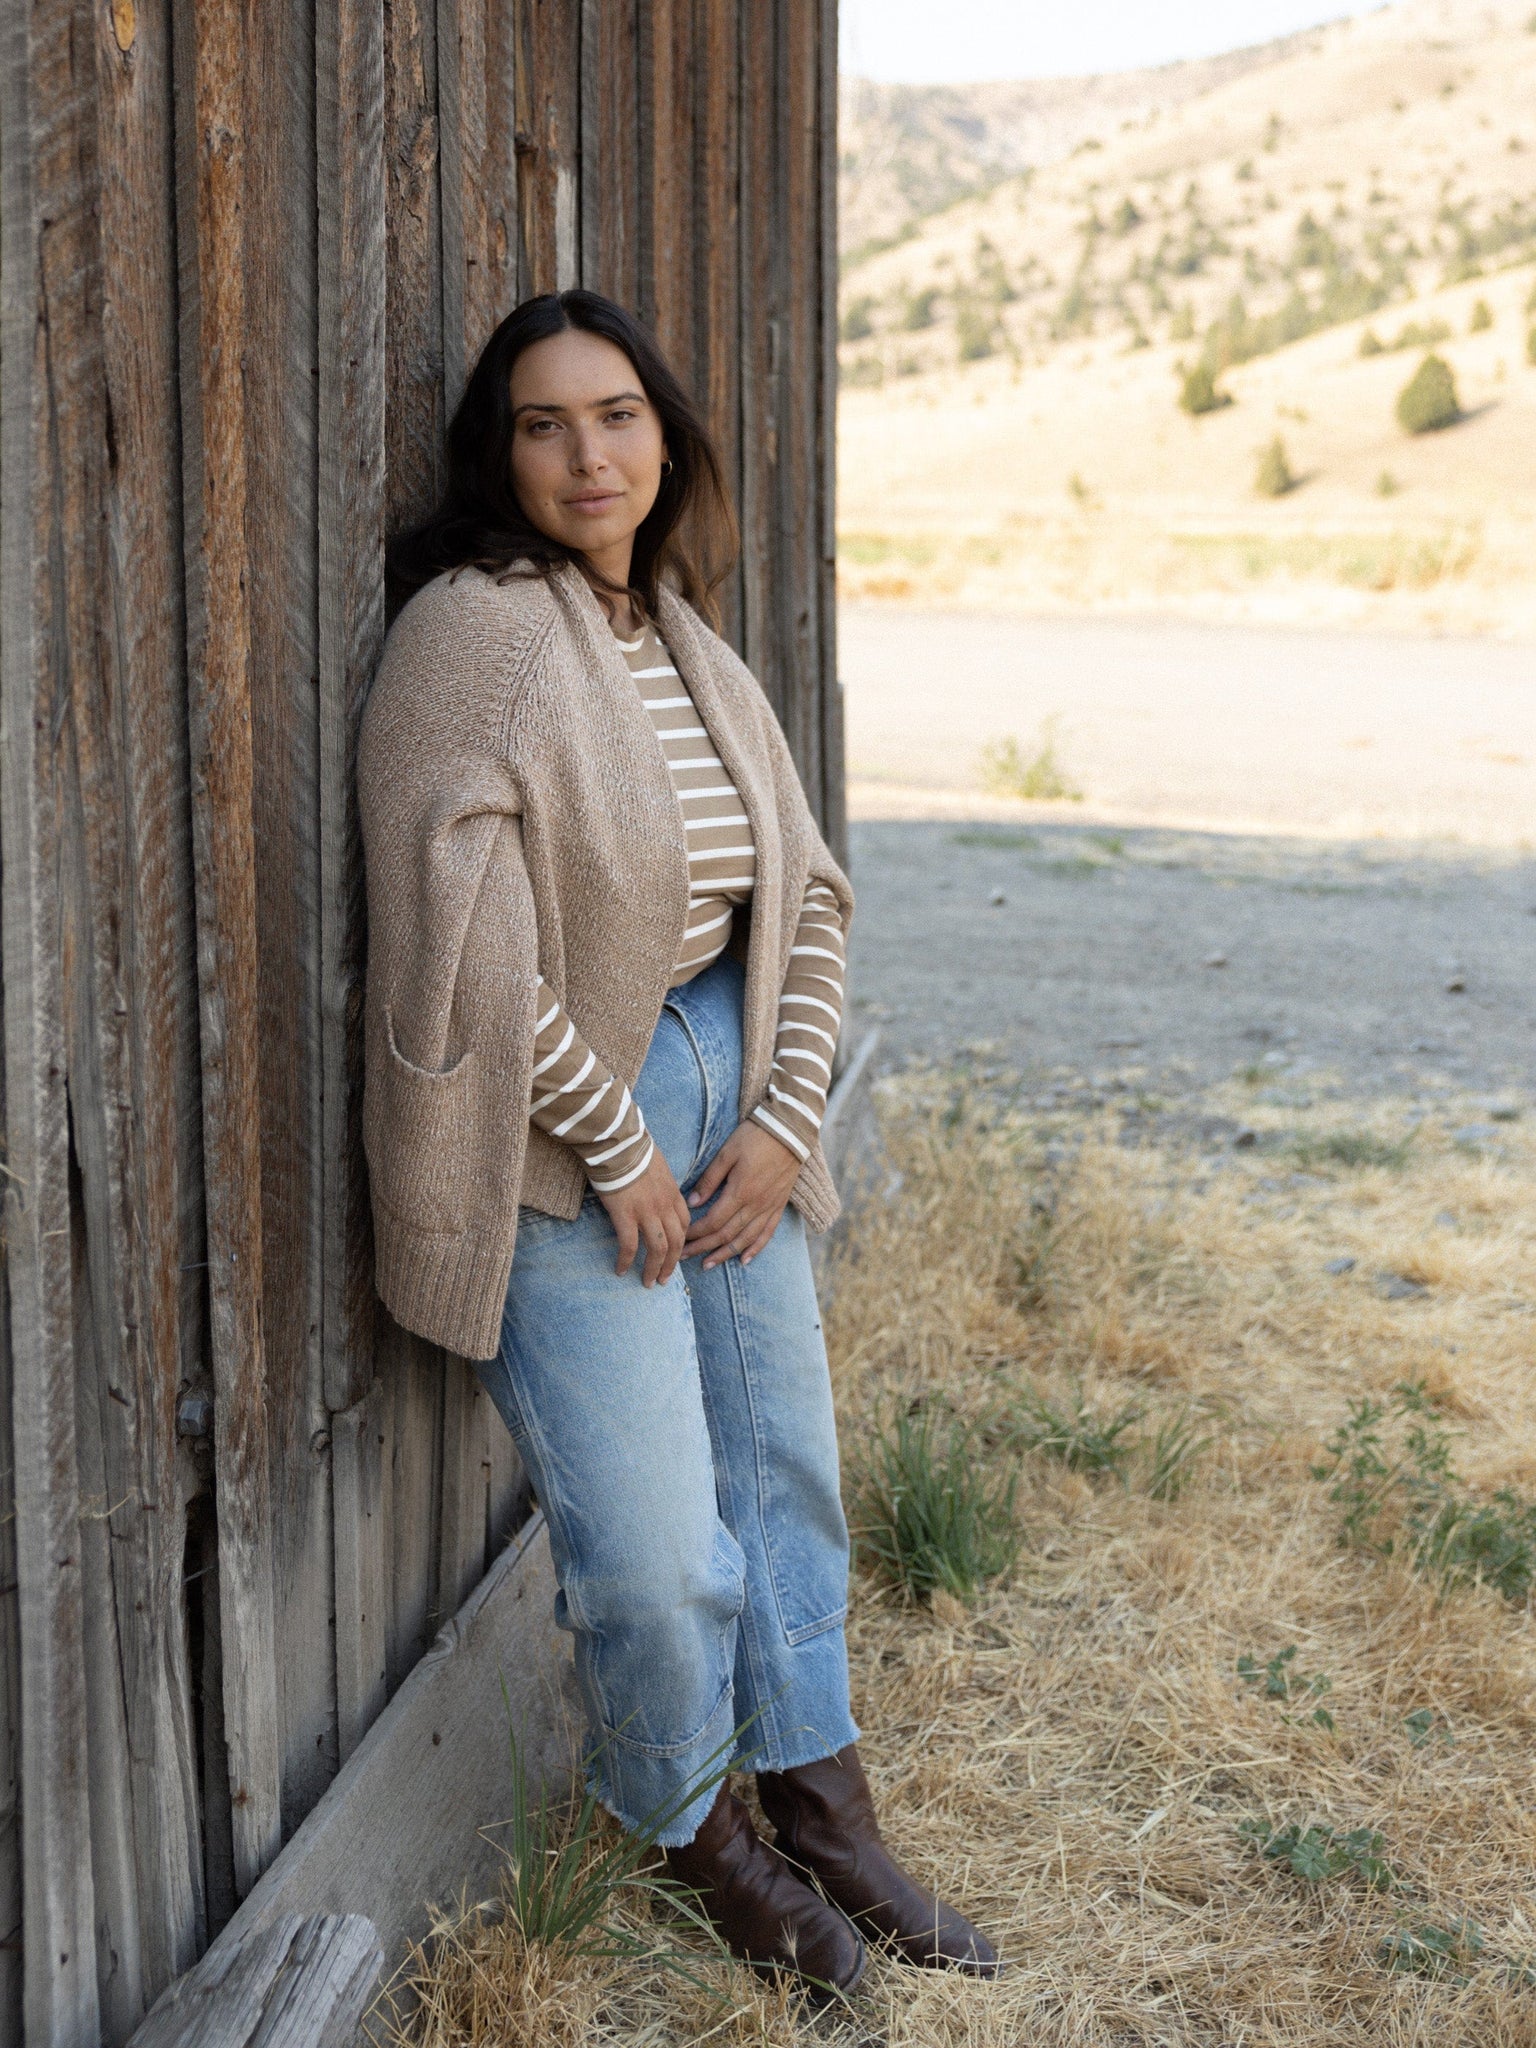 A fit woman wearing jeans and a cardigan leaning against a wooden wall while donning the Sample 144 - Mock Neck Long Sleeve Tee - Tannin Stripe.